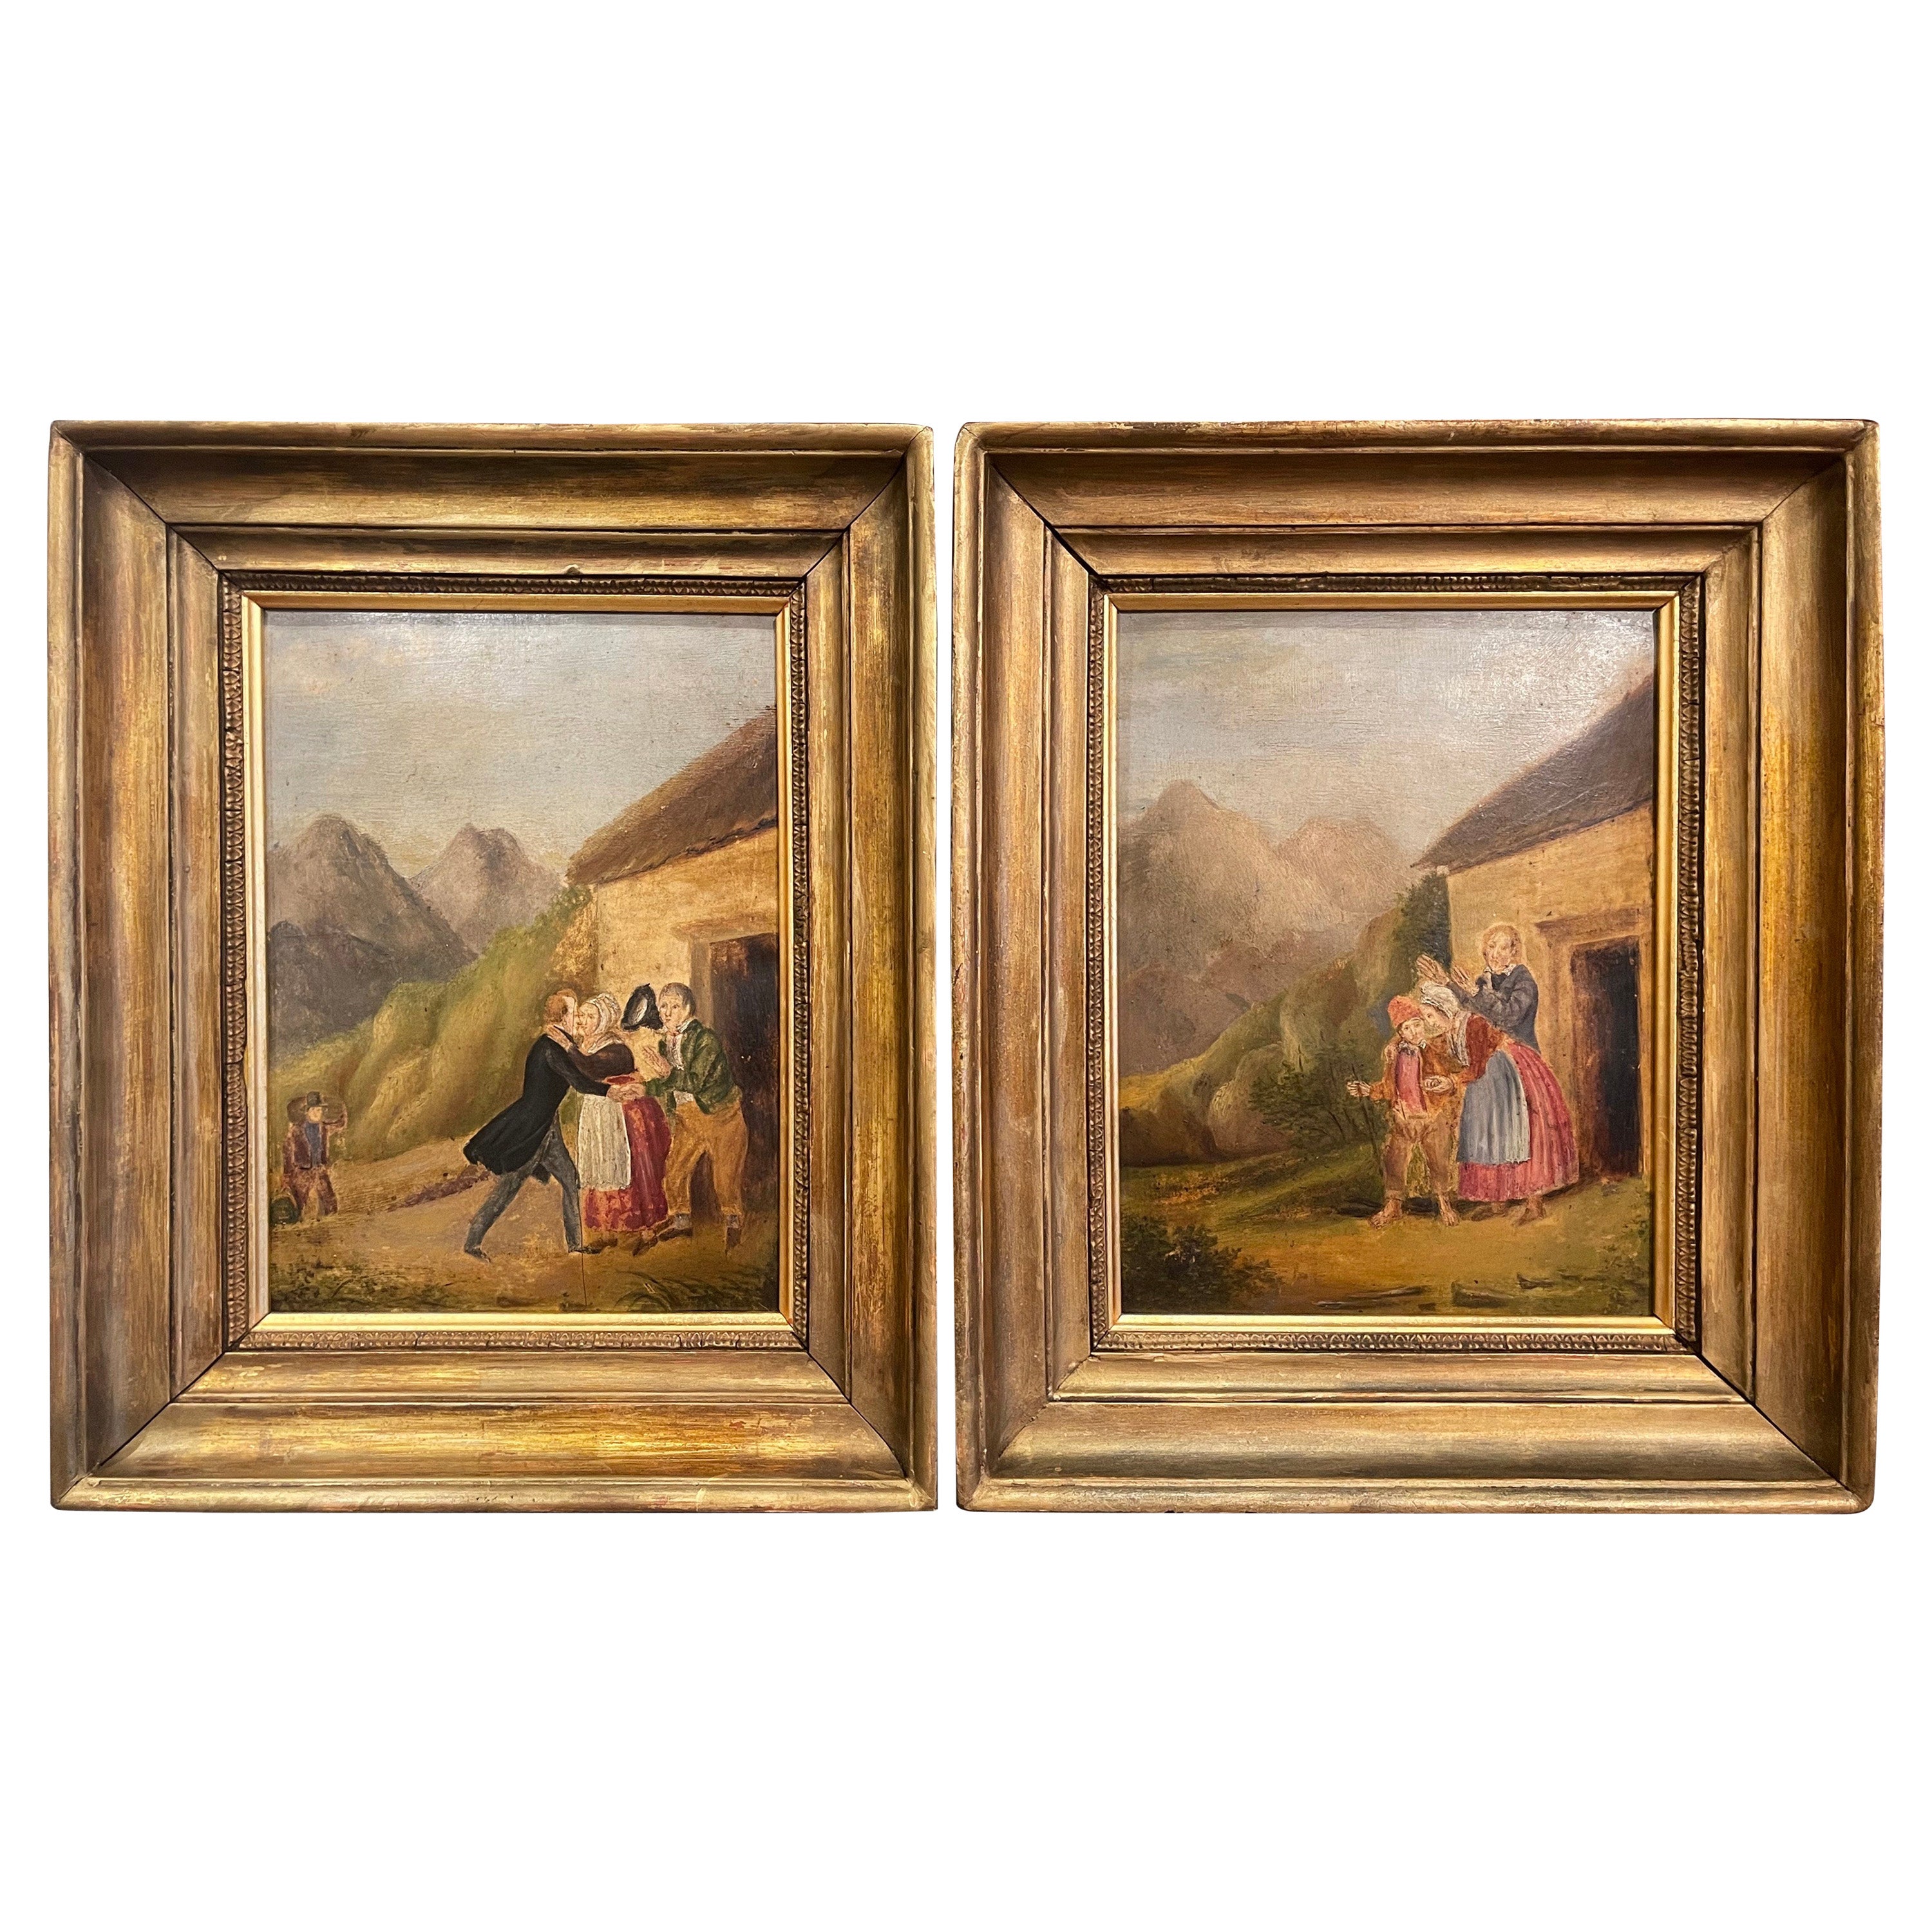 Pair of 19th Century French Pastoral Oil on Board Paintings in Gilt Frames